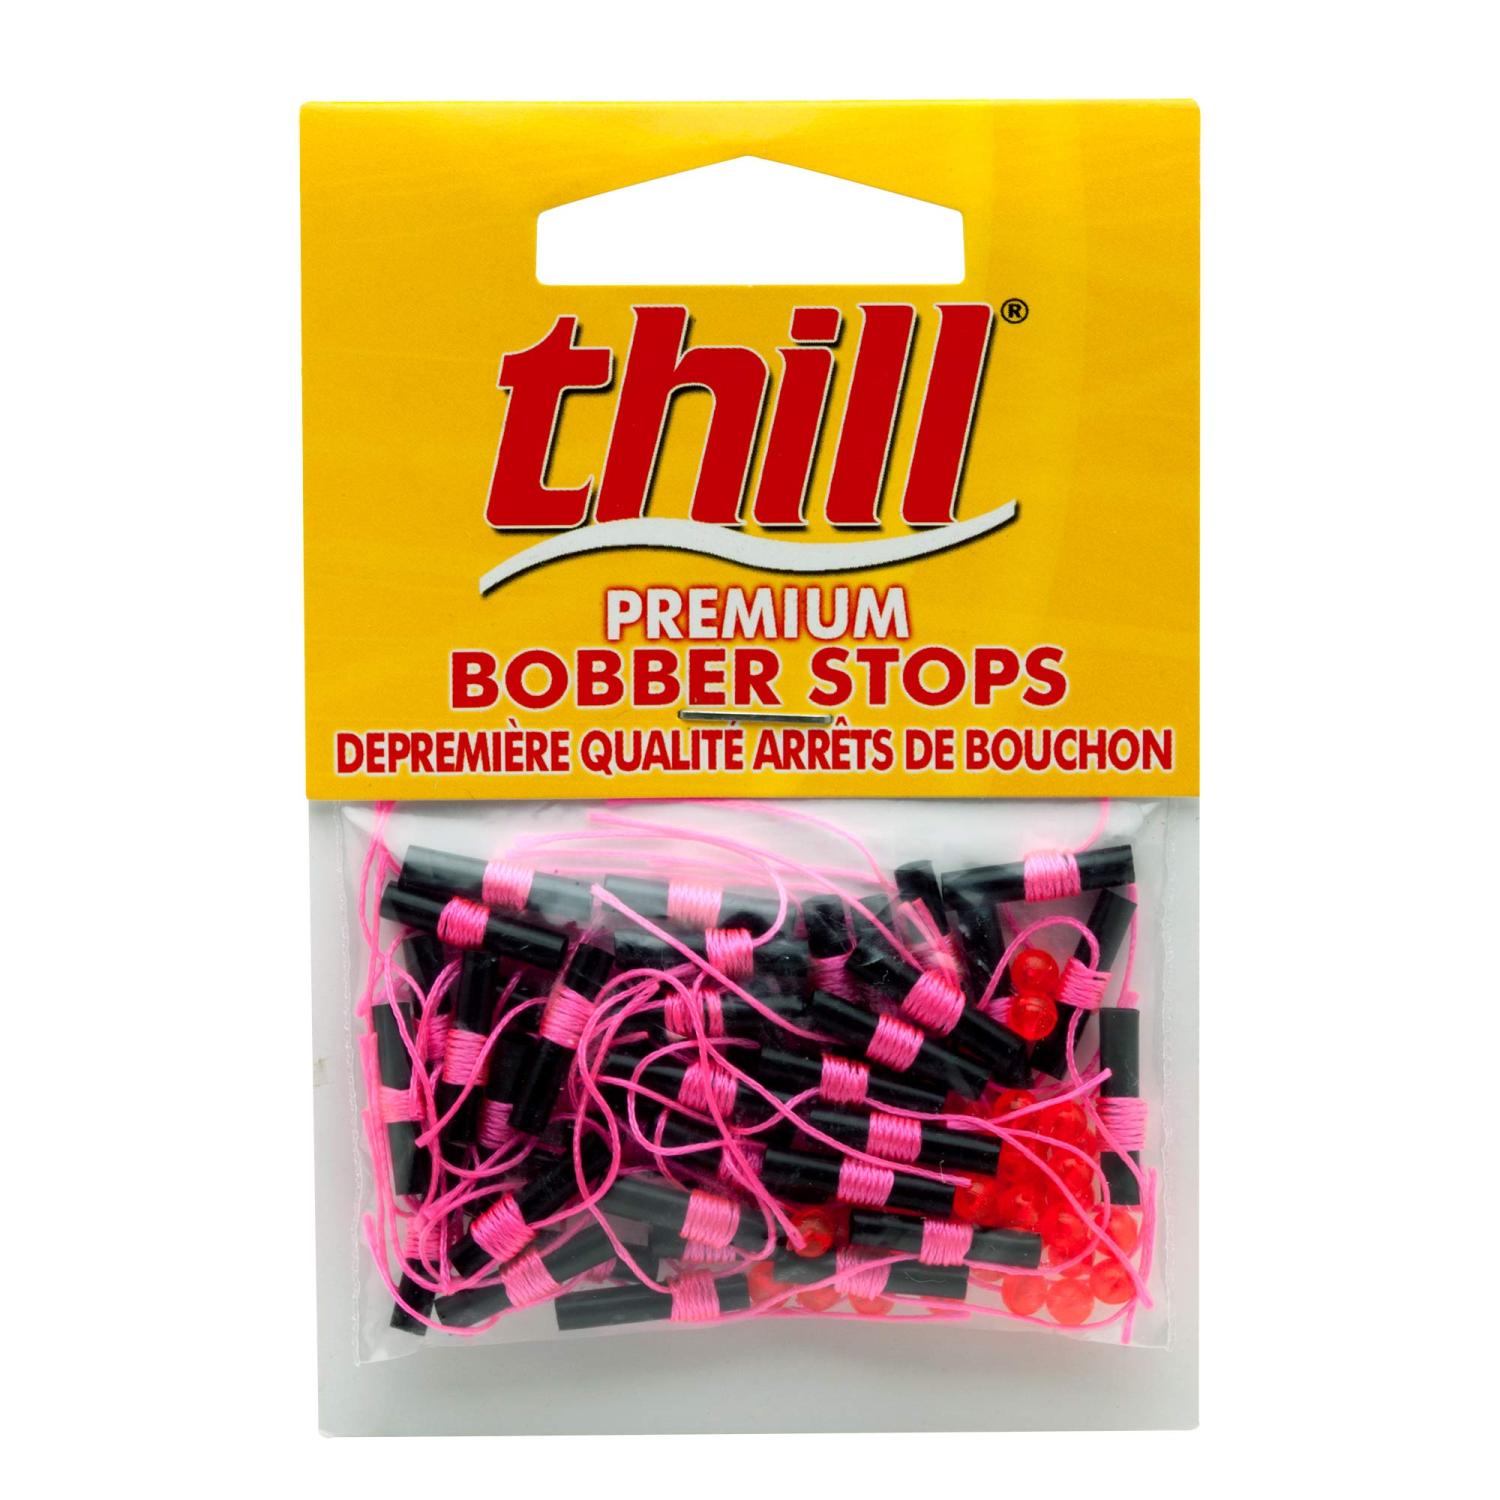 Thill Premium Bobber Stops for Fishing Floats, Fishing Gear and  Accessories, 40 Pack, Hot Pink